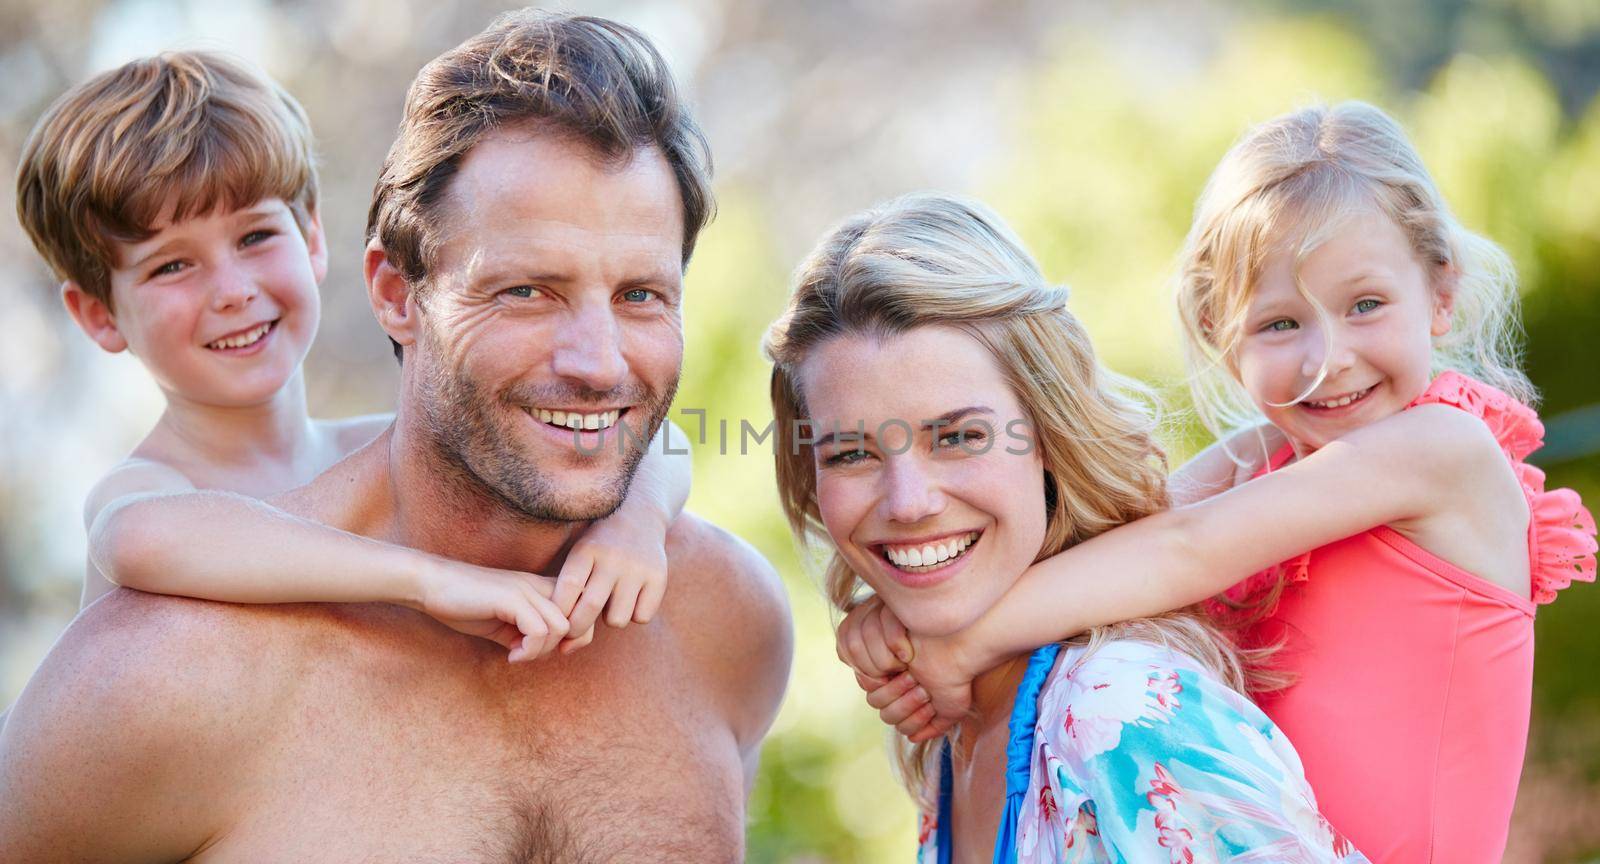 Portrait of a happy family enjoying a day outdoors together.